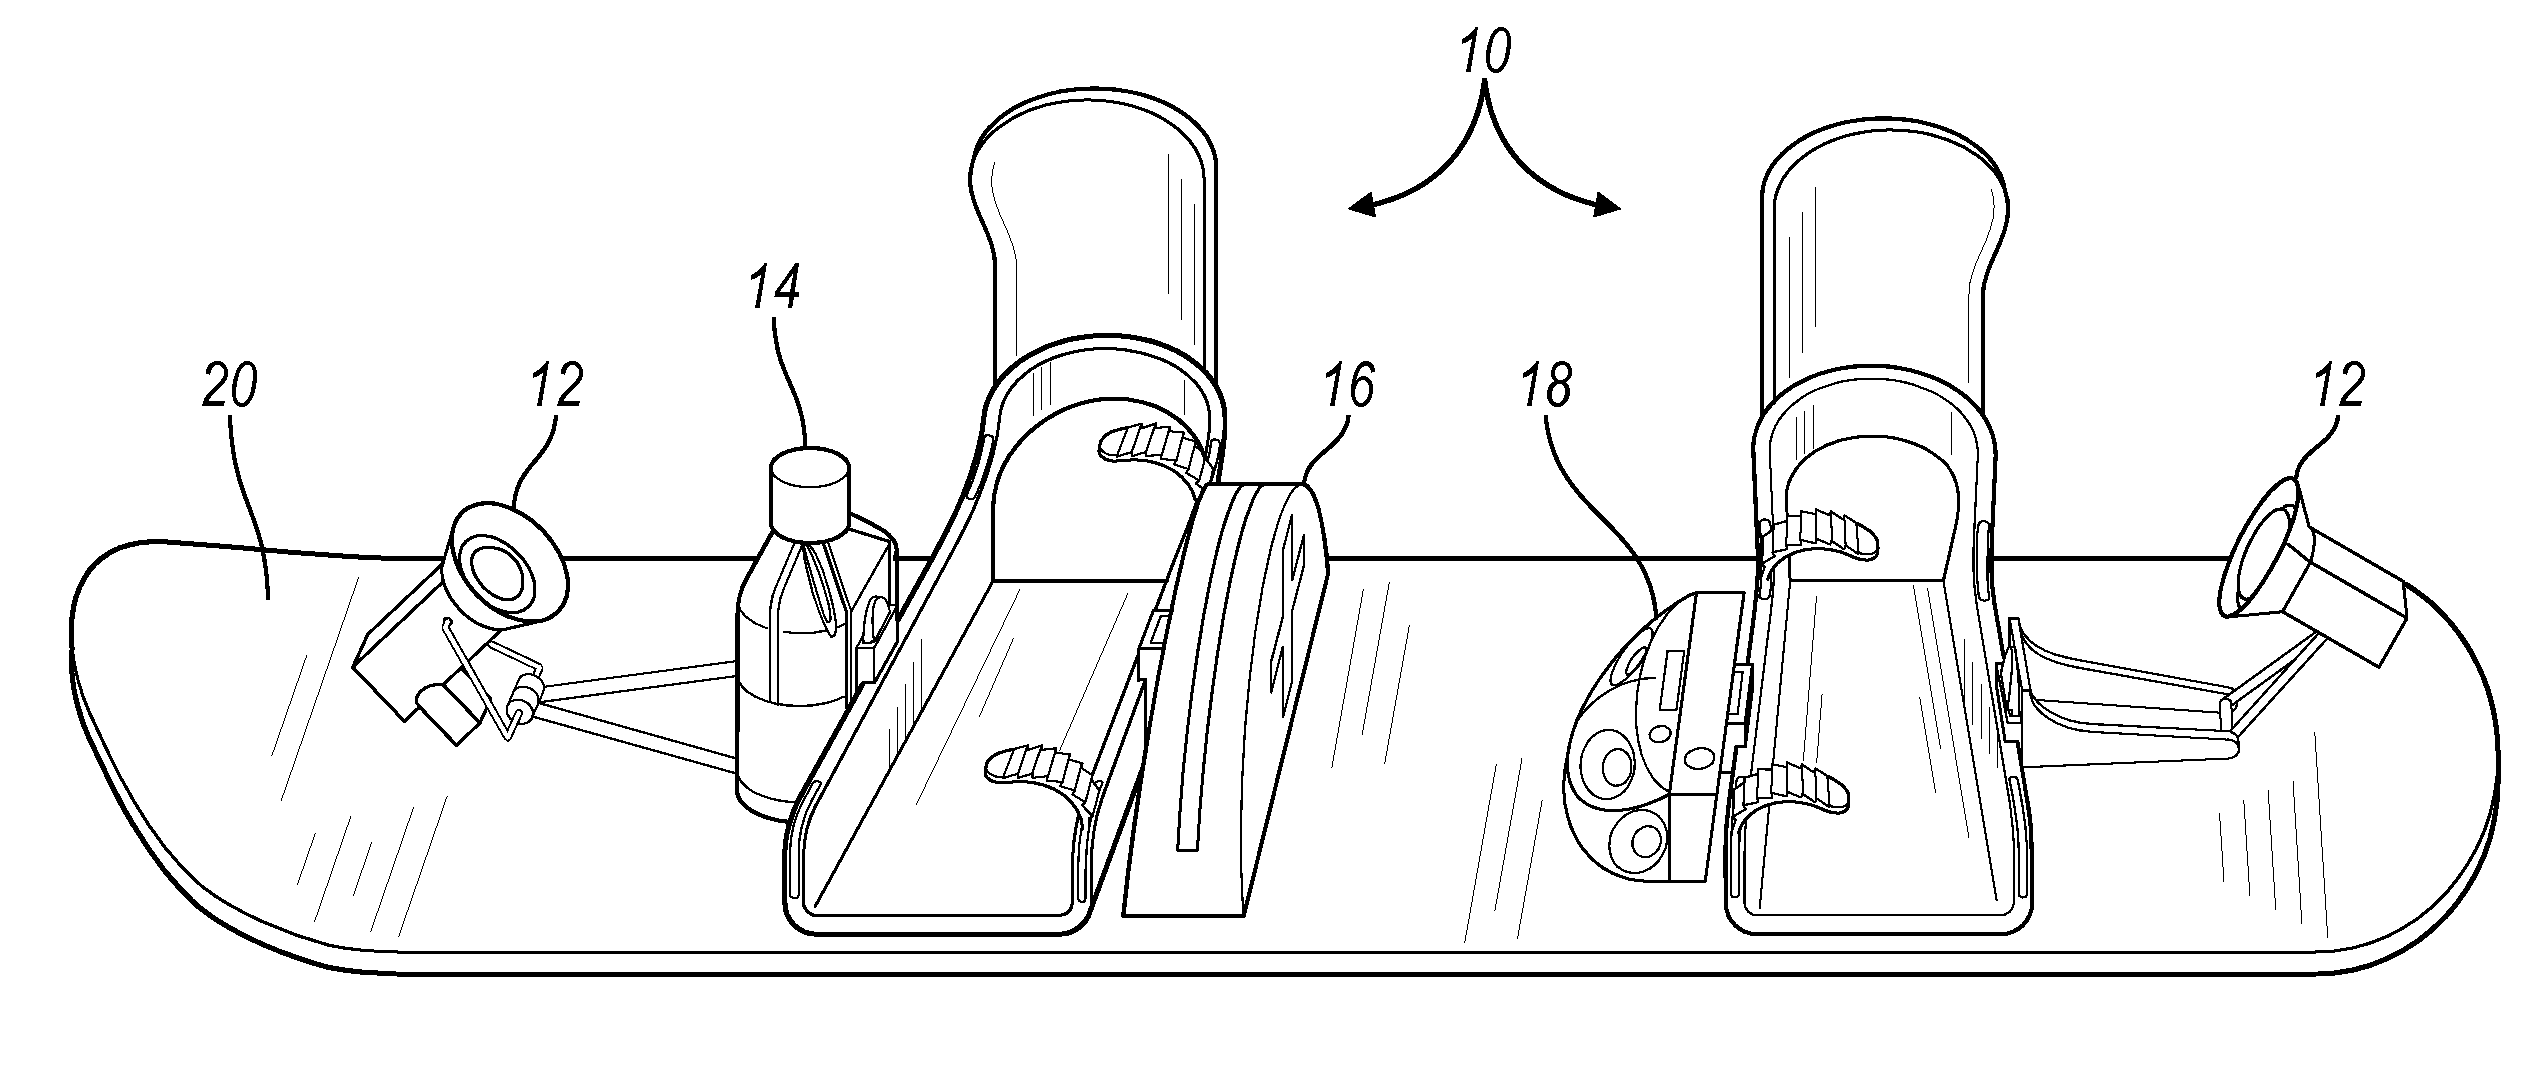 Tool-less manual quick release snowboard-mounted interface binding system via a snowboard binding